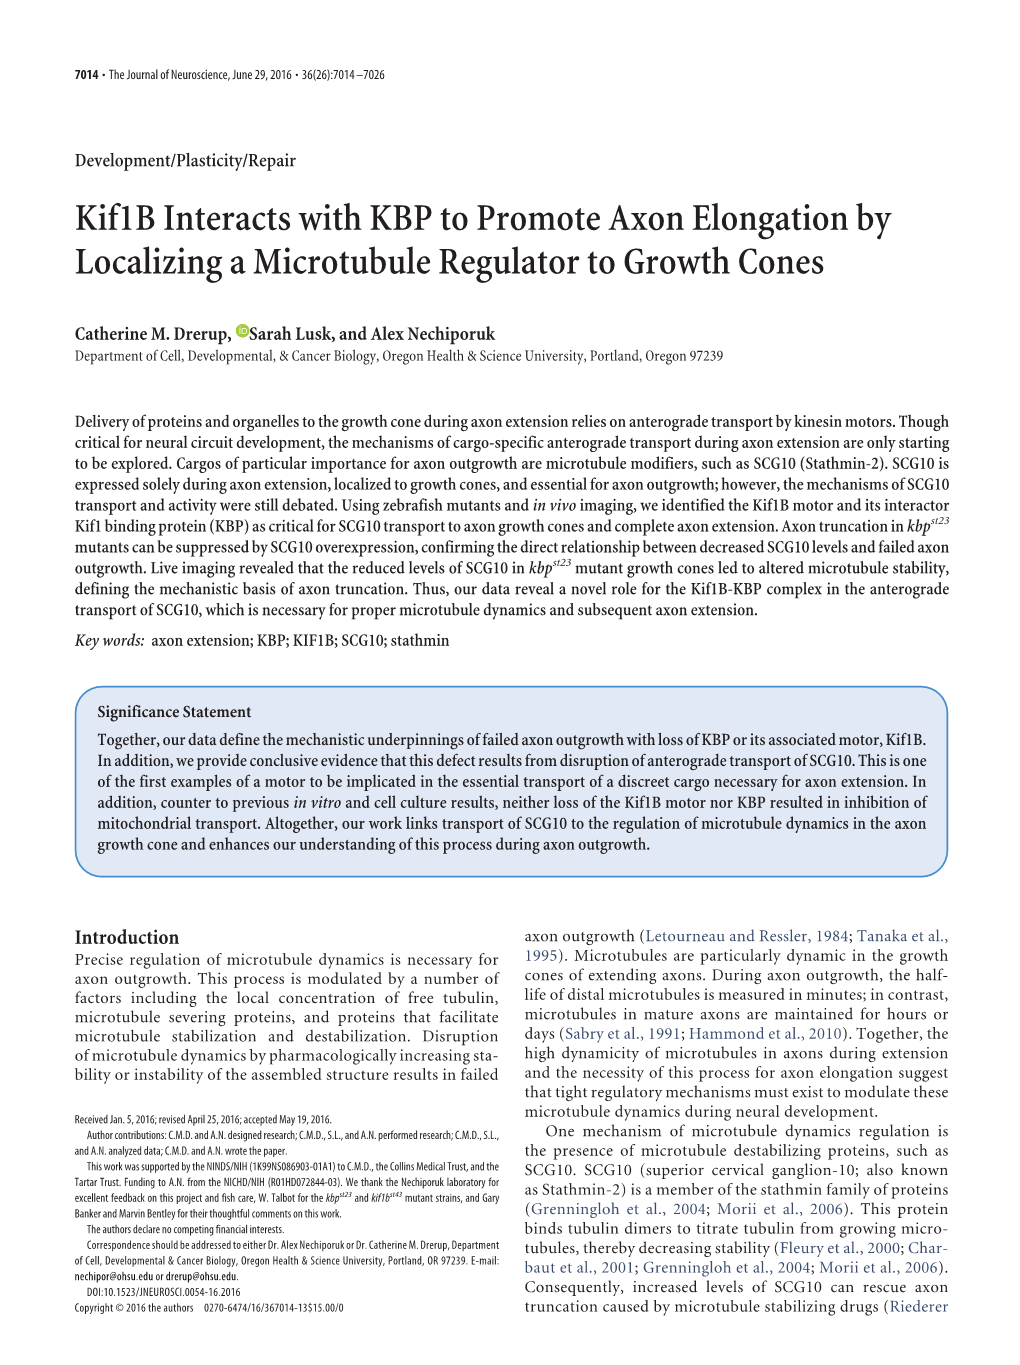 Kif1b Interacts with KBP to Promote Axon Elongation by Localizing a Microtubule Regulator to Growth Cones